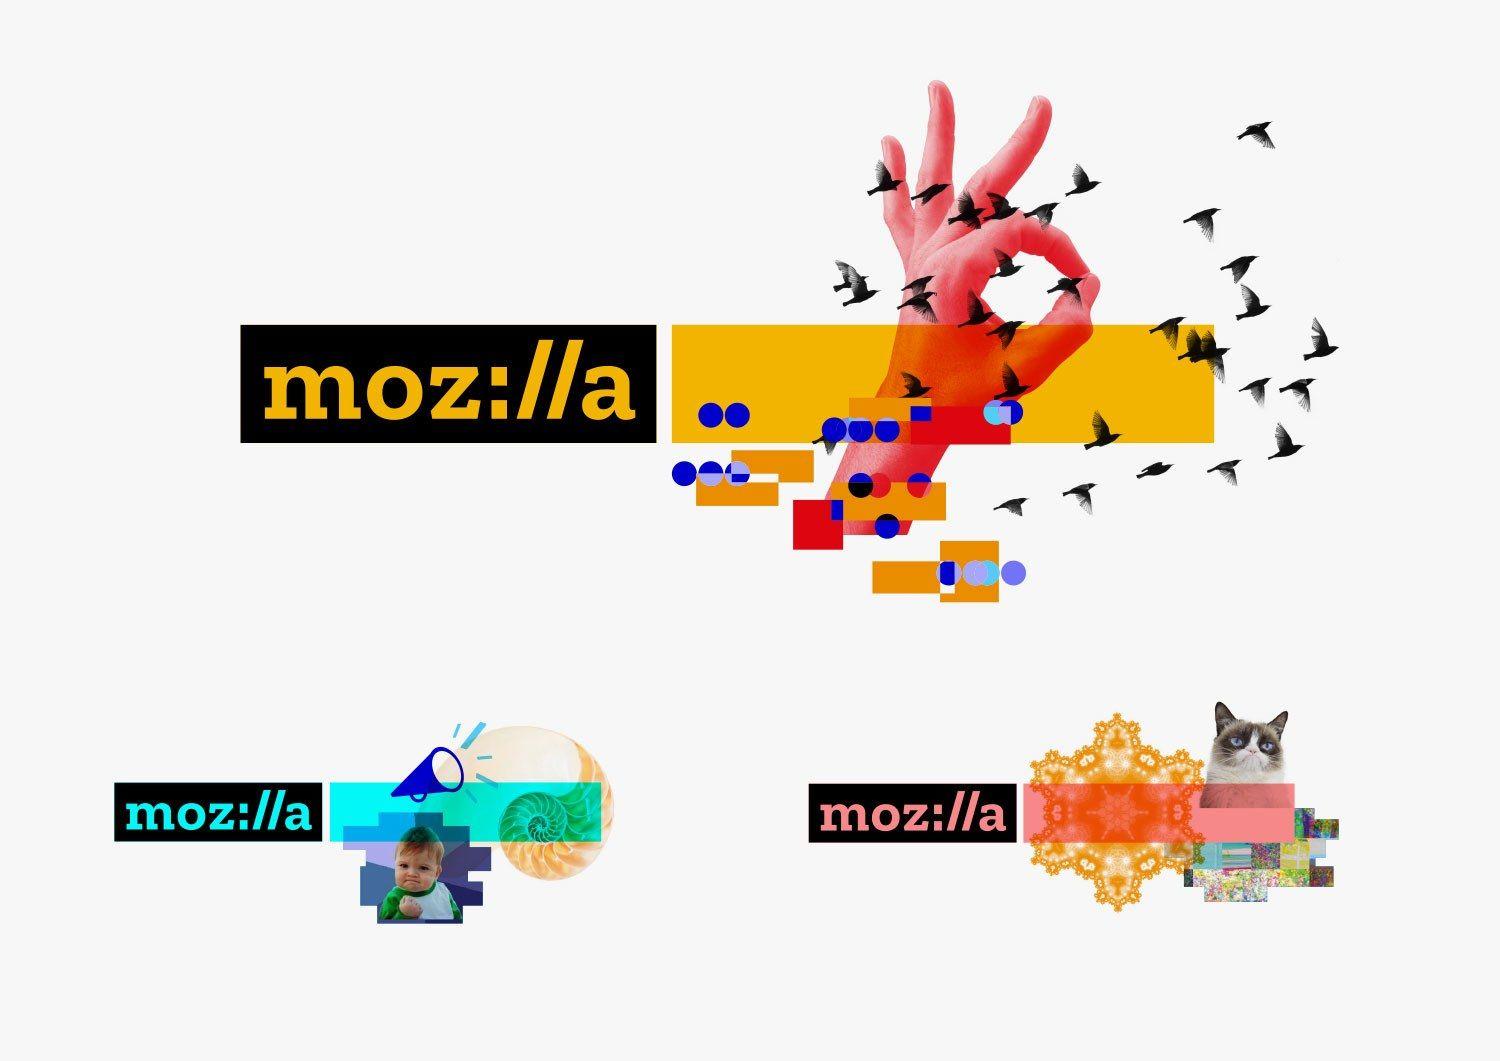 New Mozilla Logo - Introducing Mozilla's New Logo, Moz://a. Get It? | WIRED